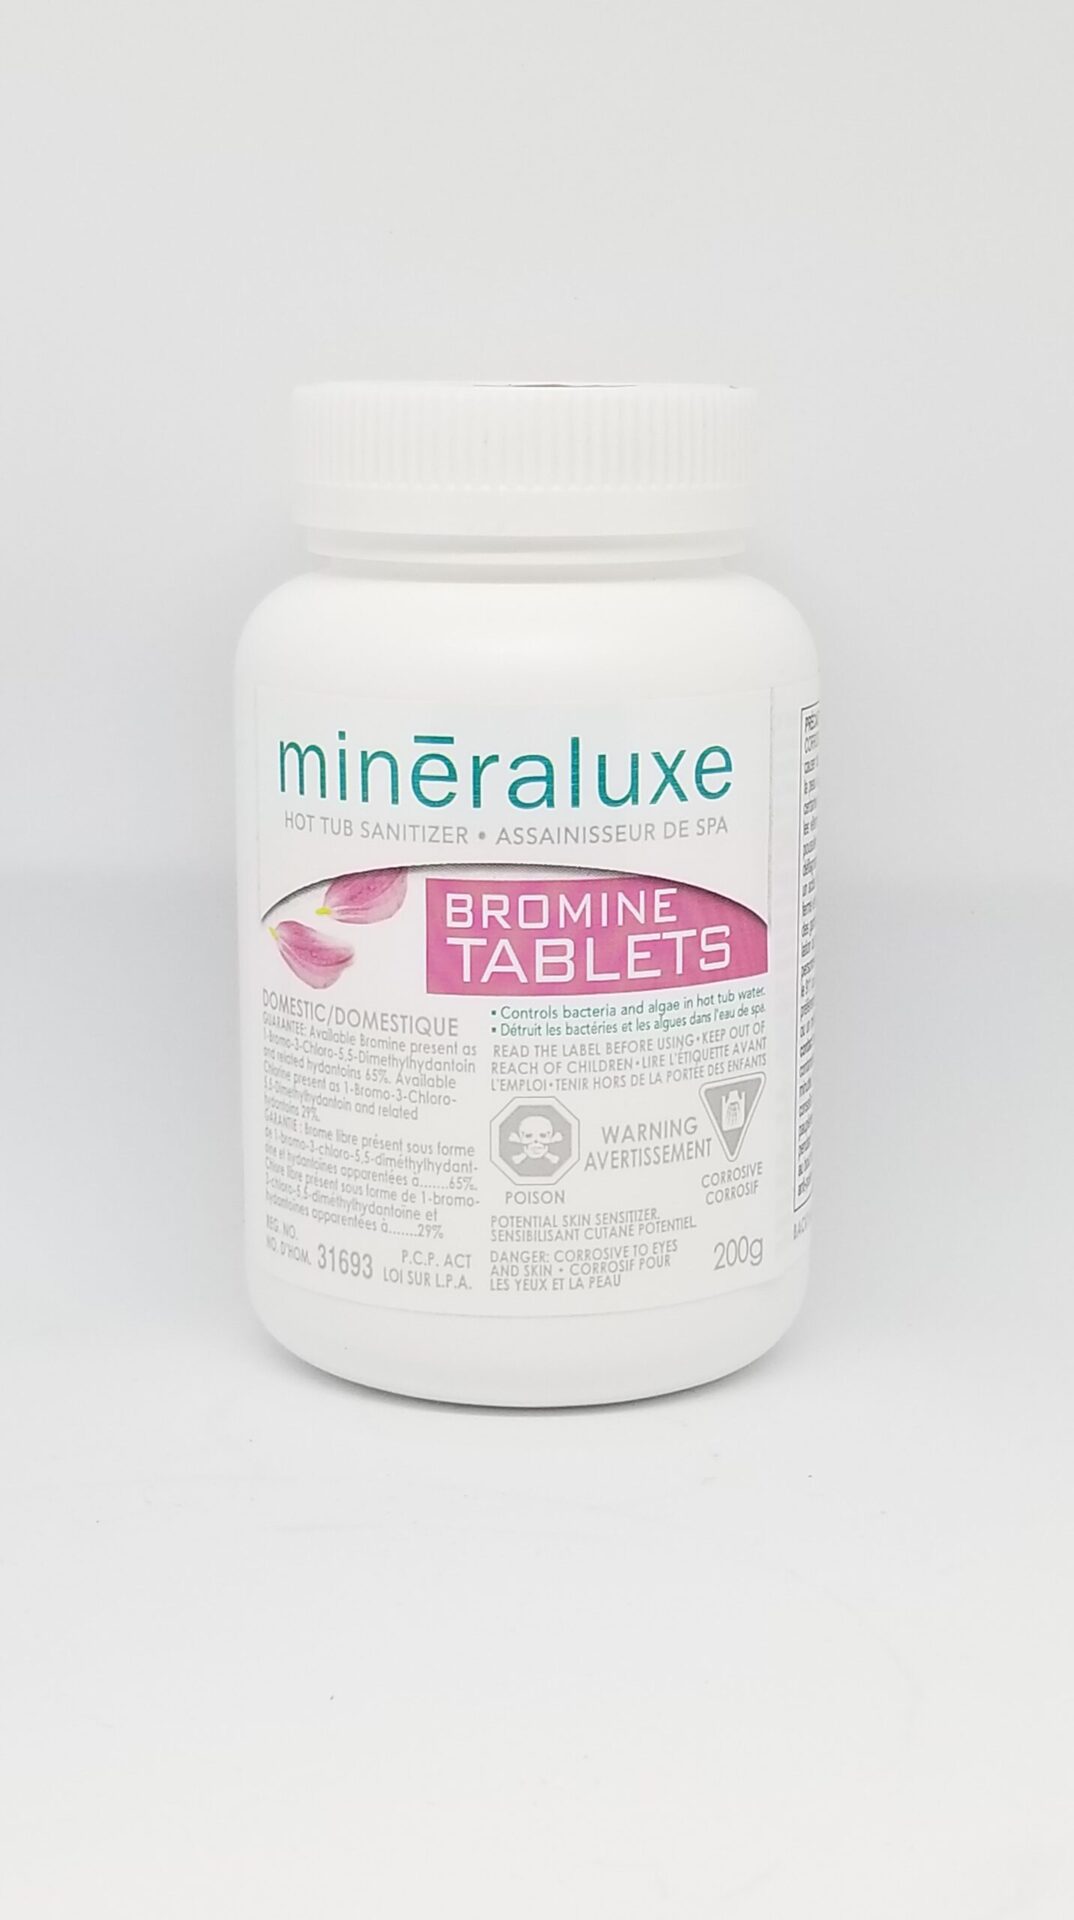 Mineraluxe Bromine Tabs 200g scaled - Mineraluxe Bromine Tabs 200g